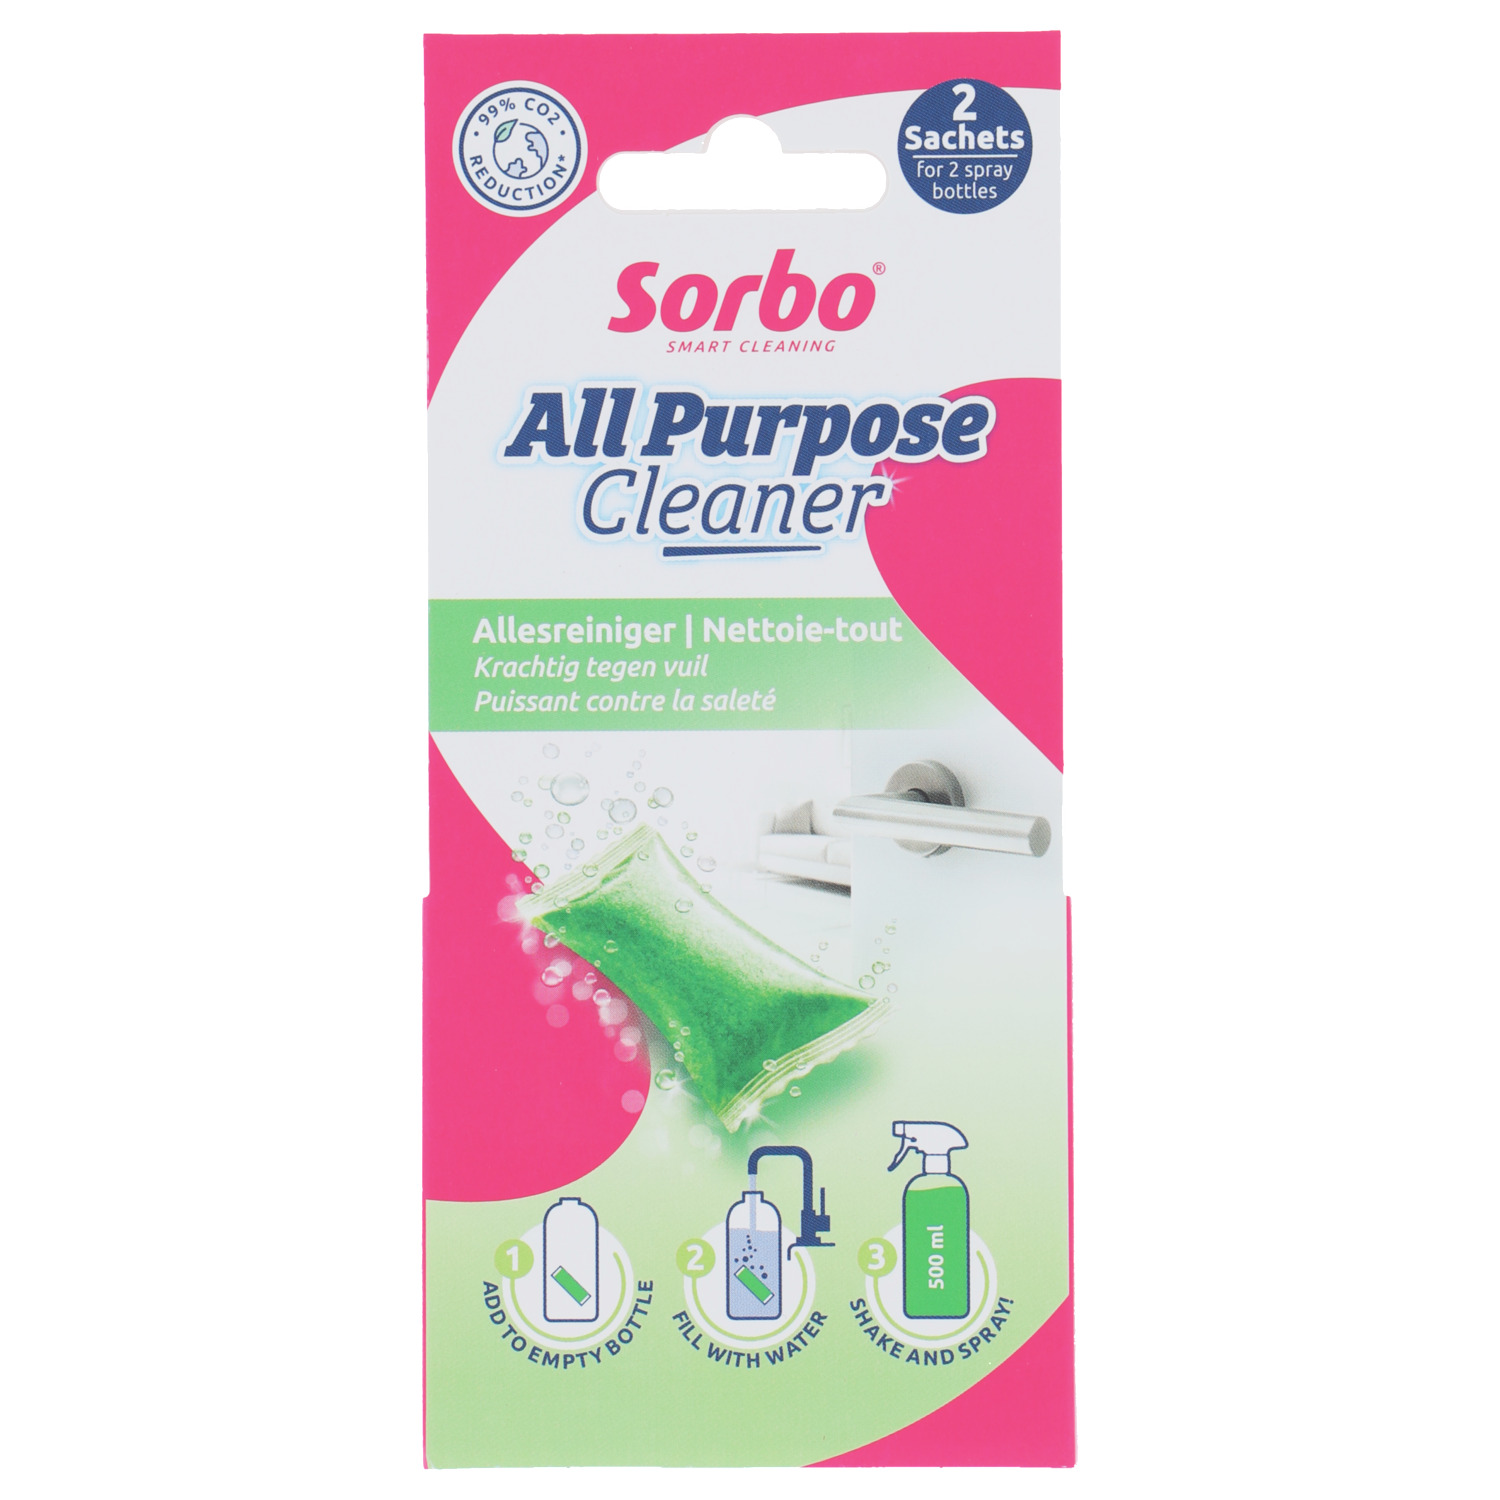 All-purpose Cleaner sachets 2pcs